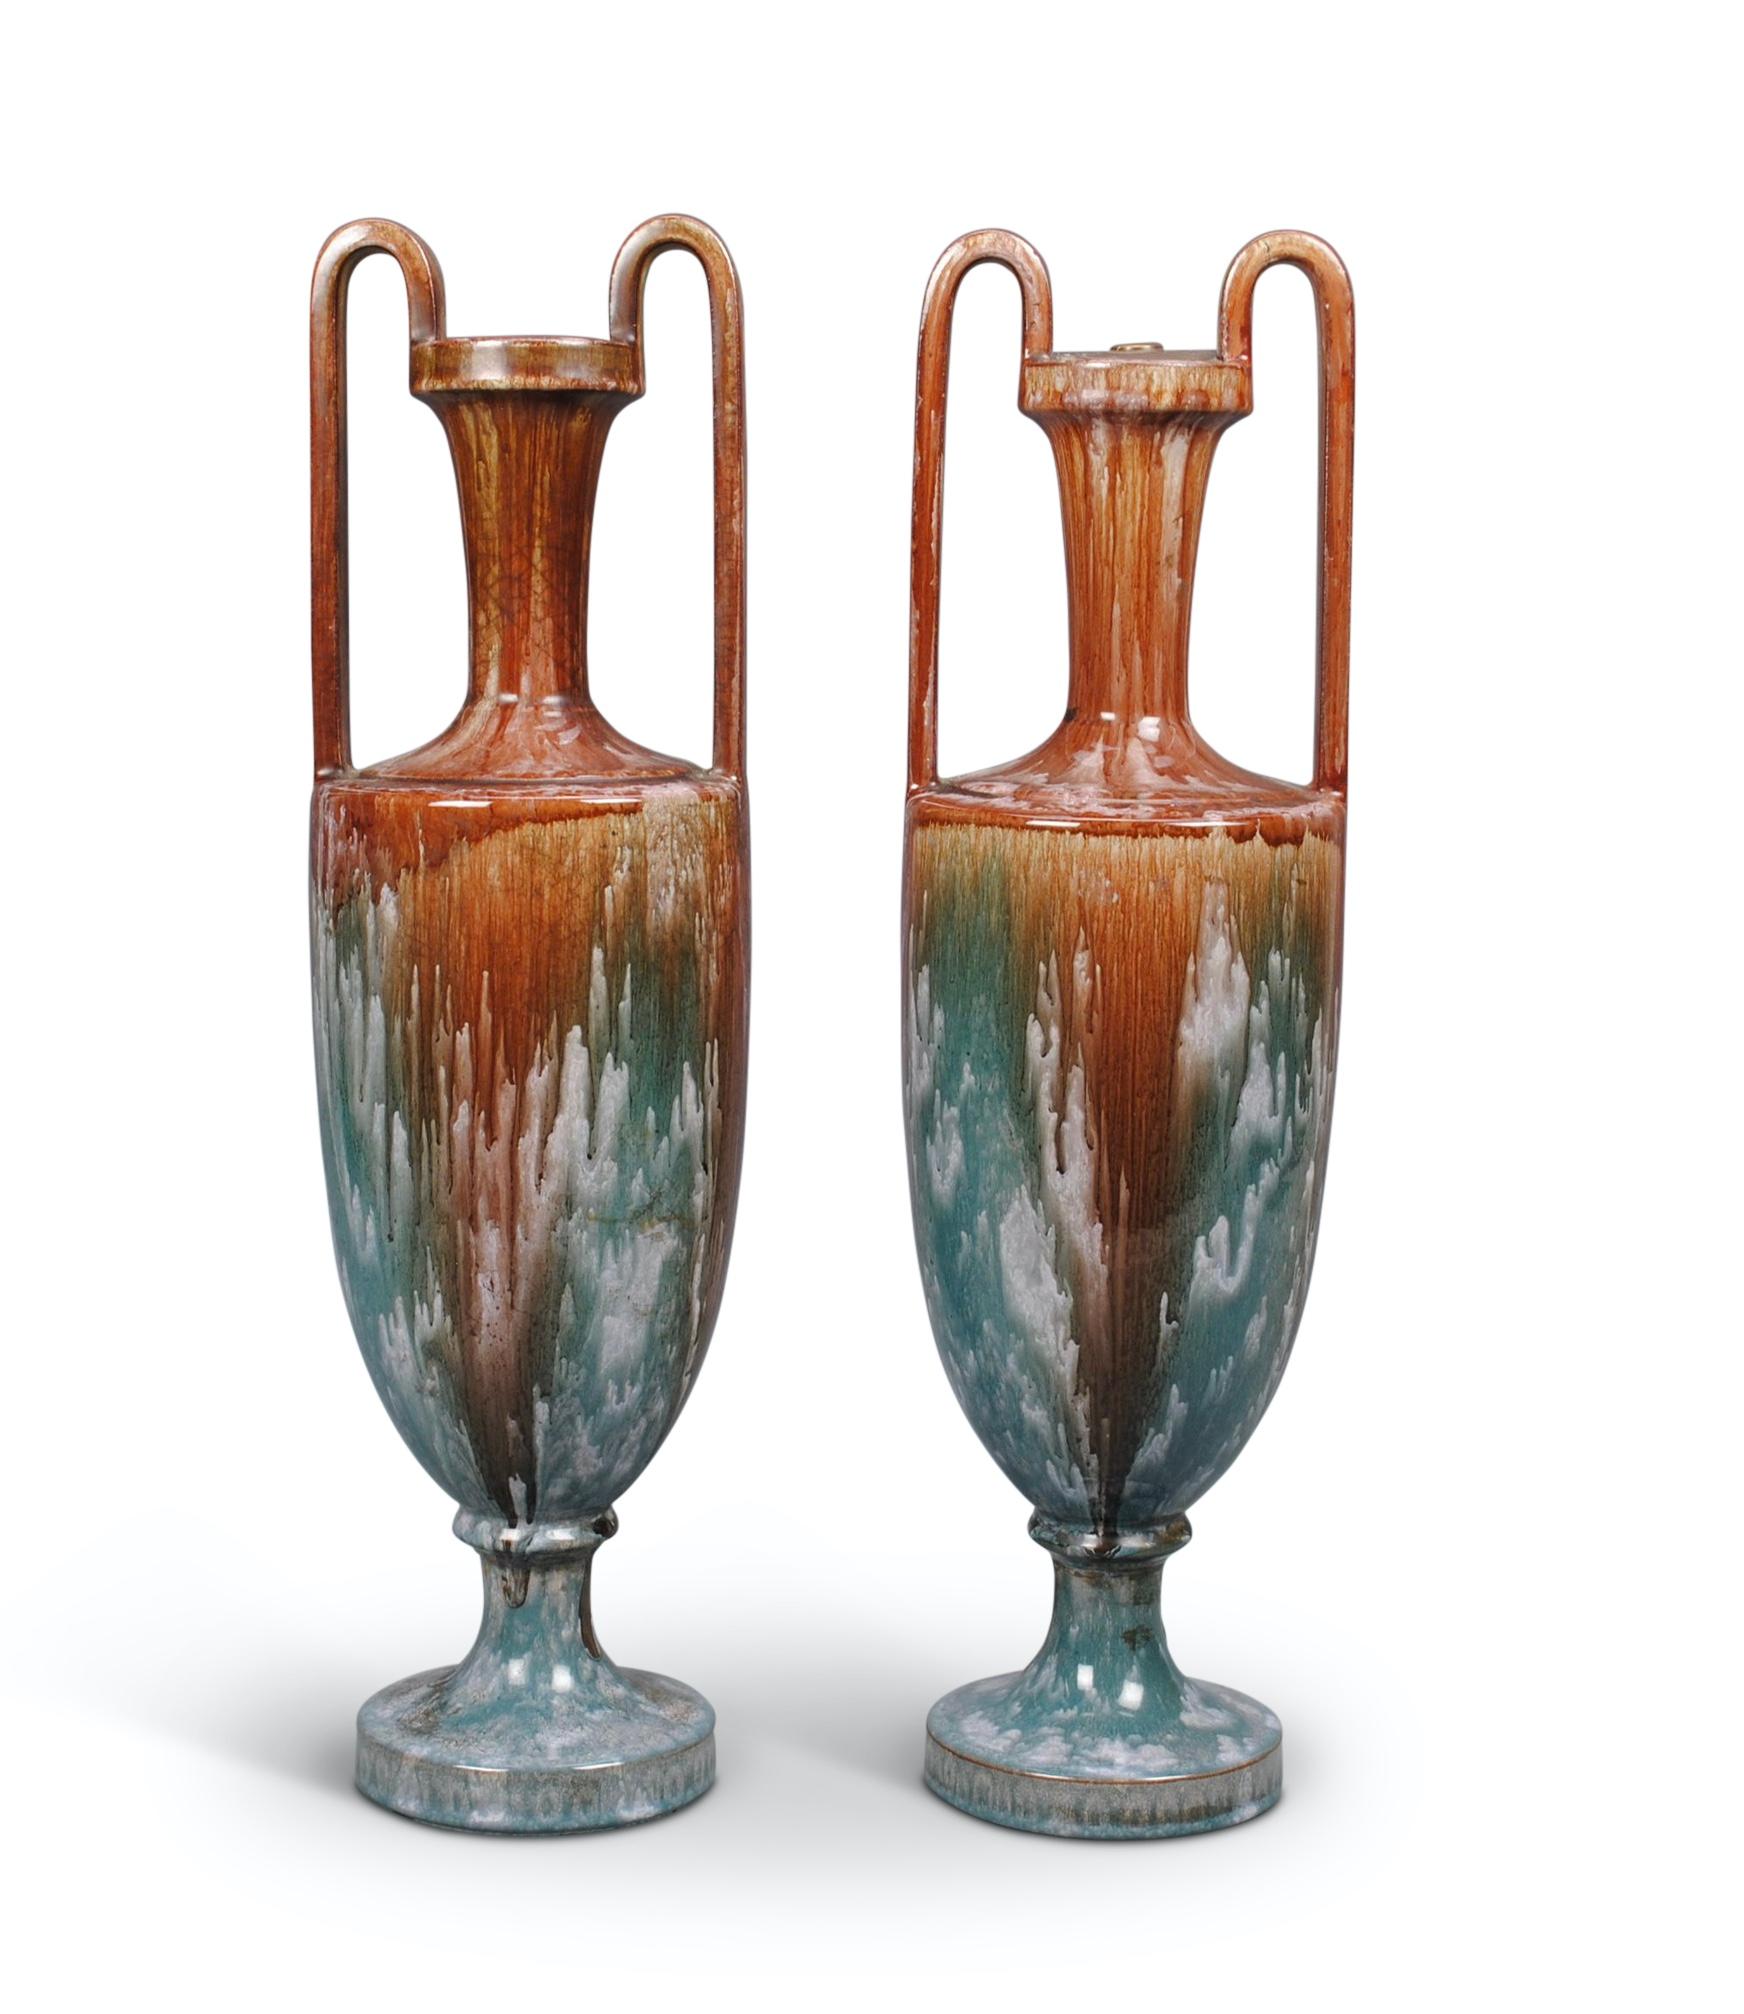 A fine pair of early 20th century, probably French, ceramic amphora shaped vases, with wonderful drip glaze and craquellure decoration.